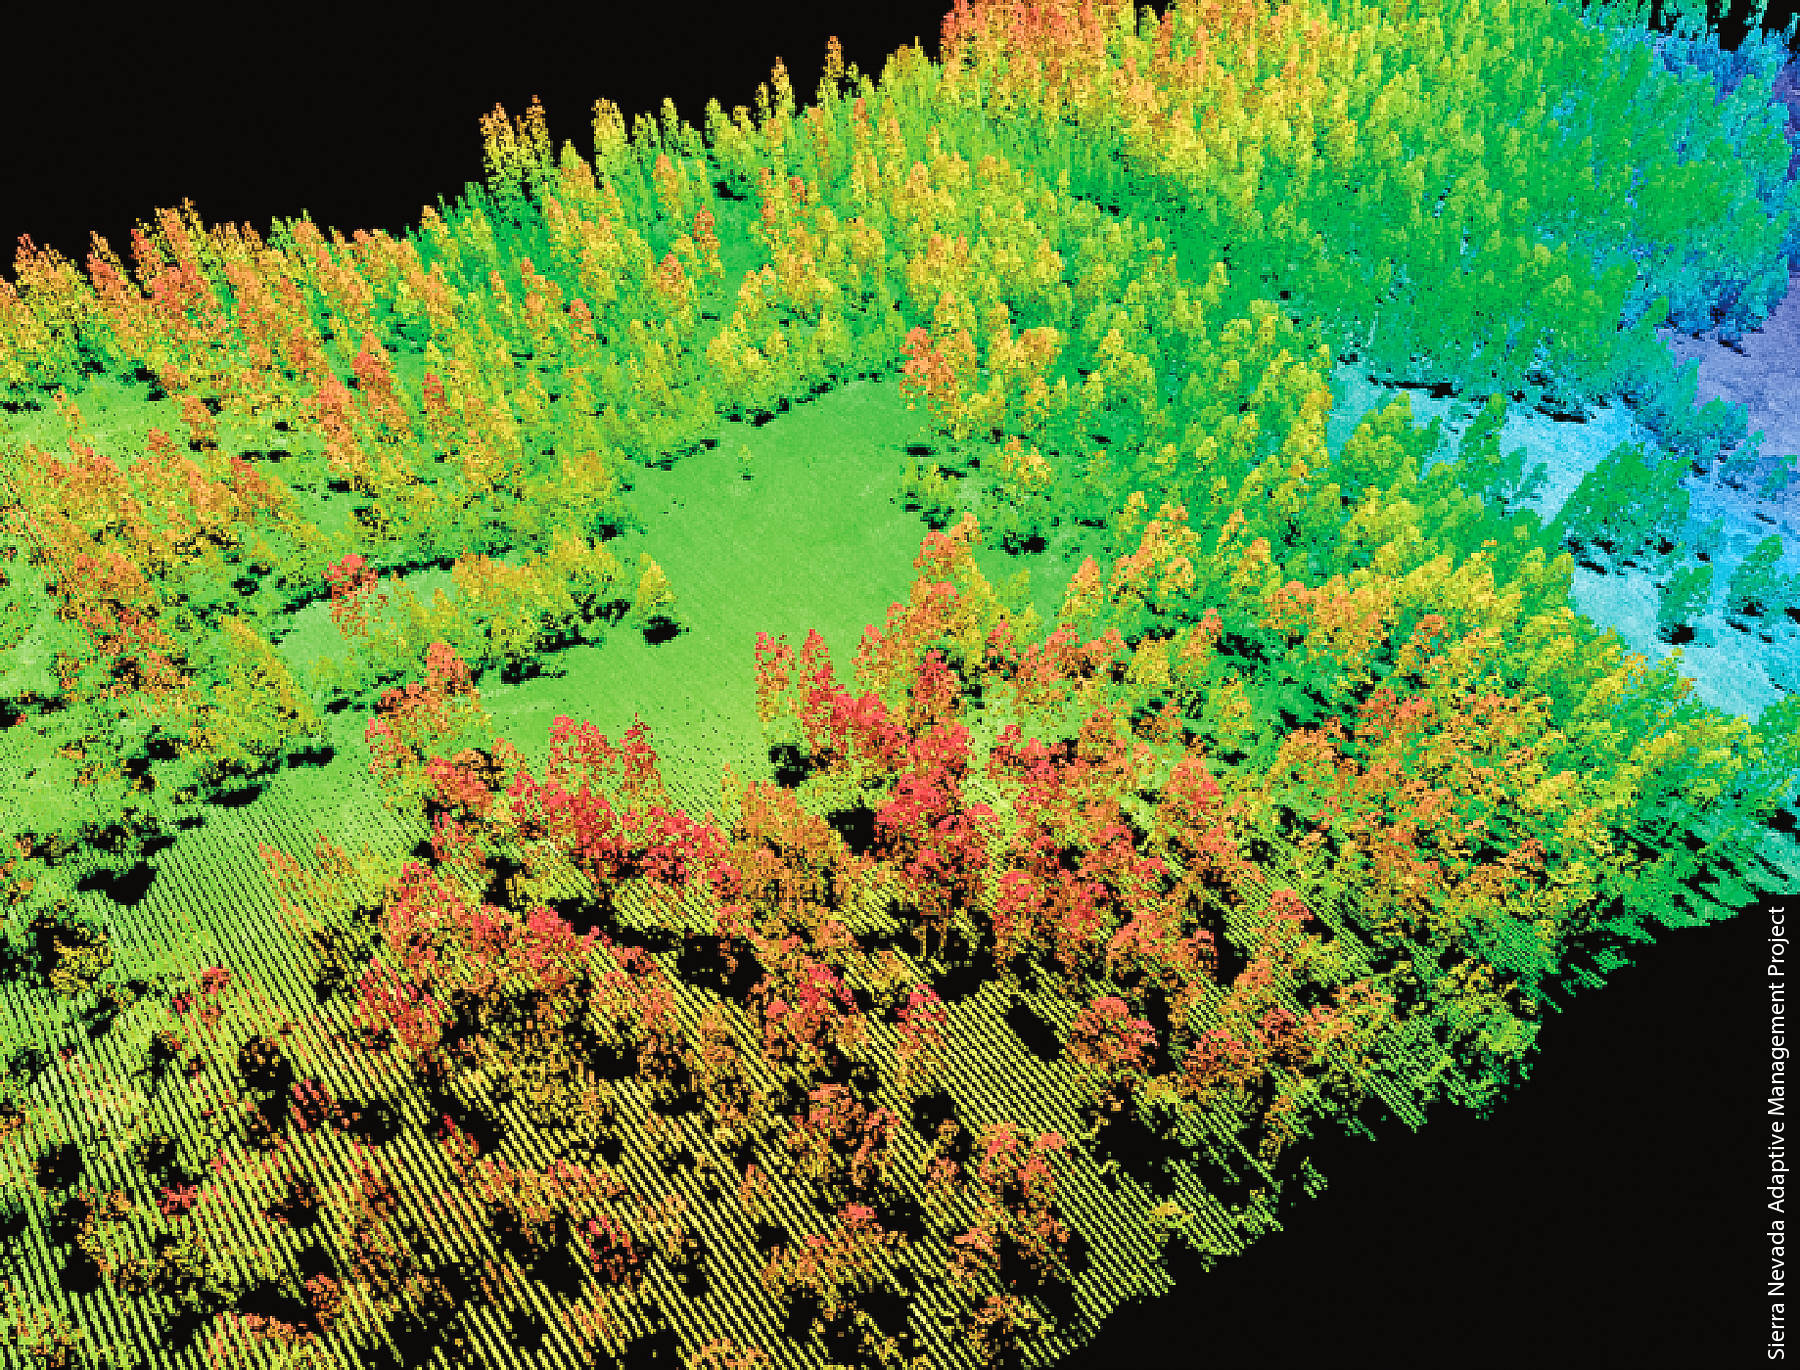 Collections of Lidar points show trees in the Sierra National Forest, where much of the research on remote sensing has occurred.